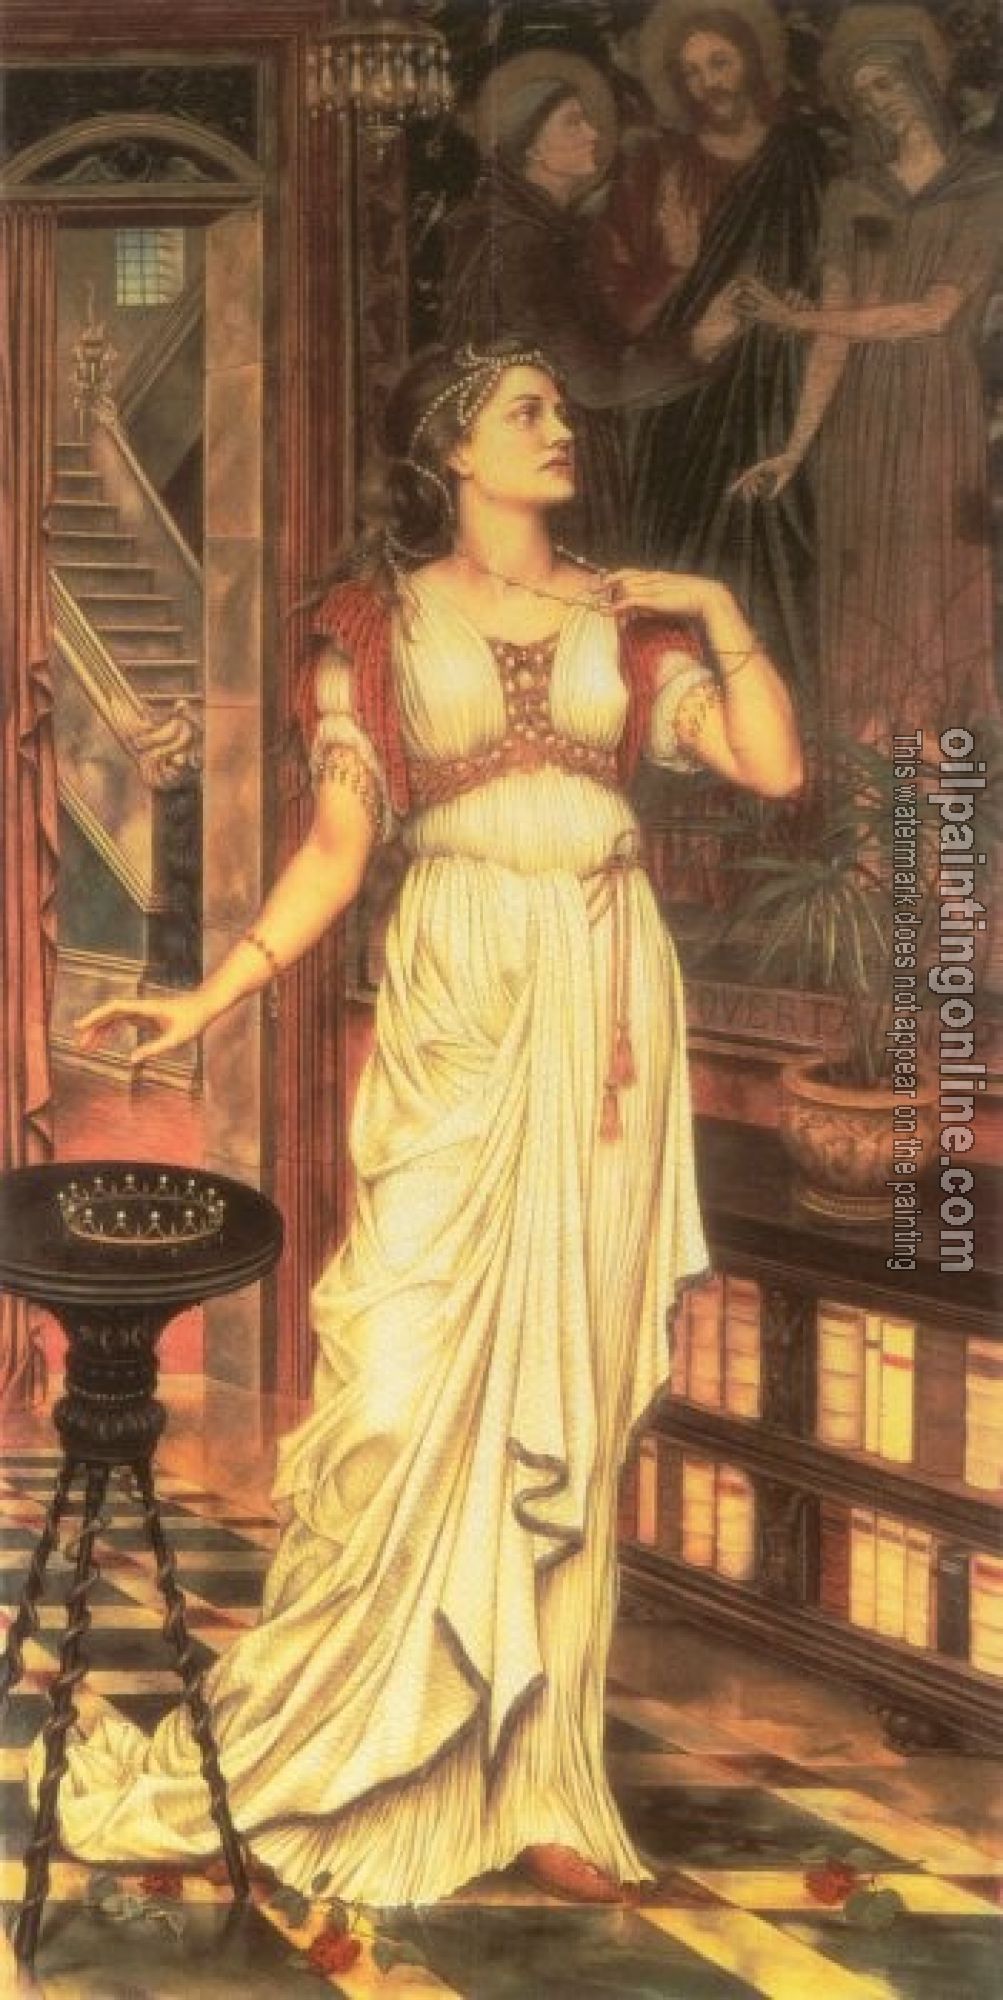 Morgan, Evelyn De - The Crown of Glory